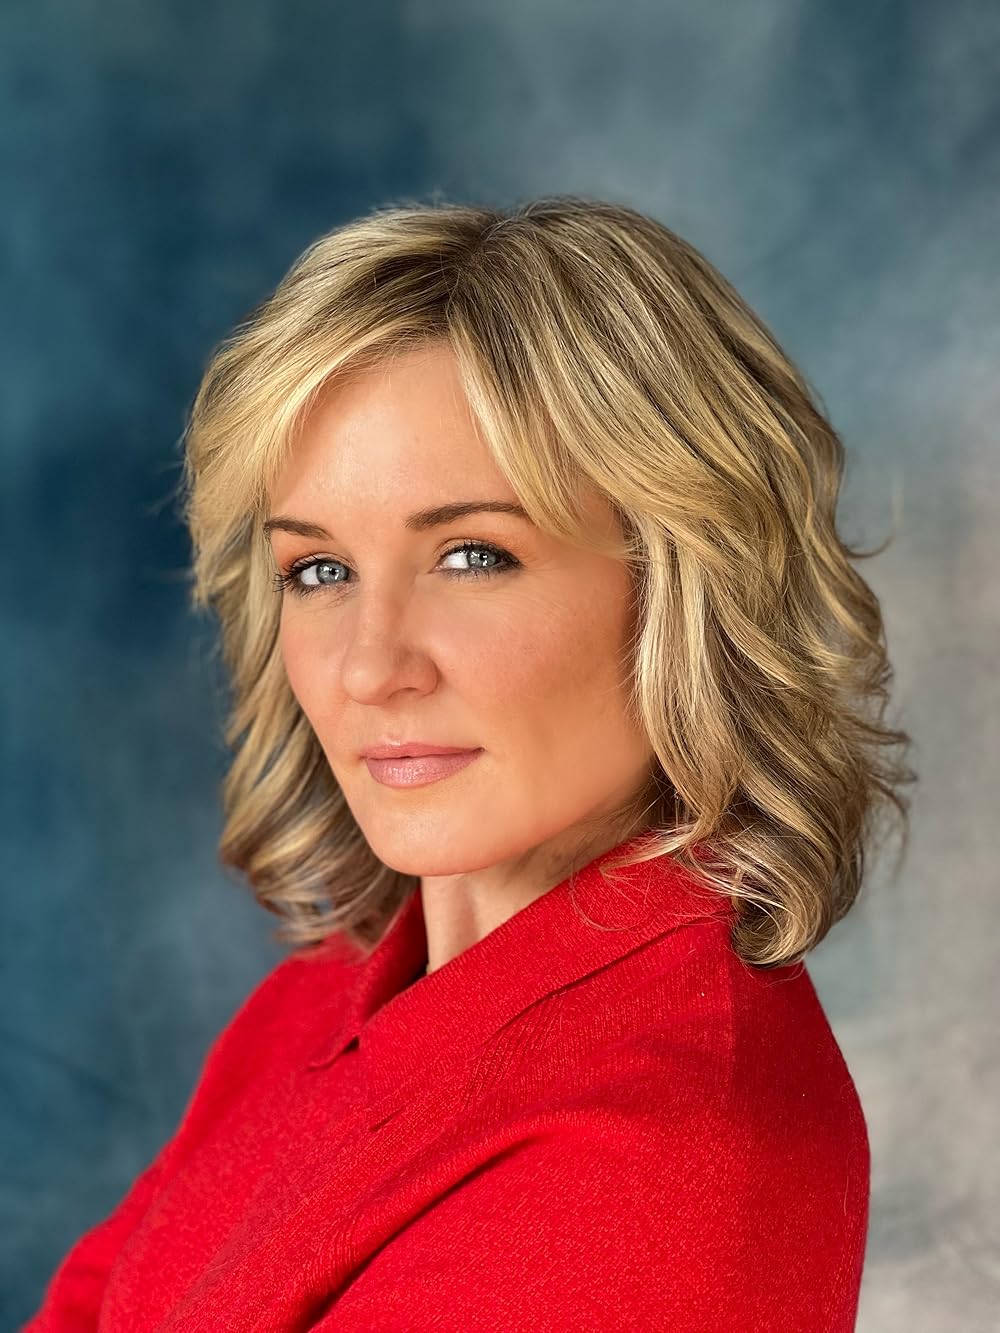 Best of Amy carlson hot pics